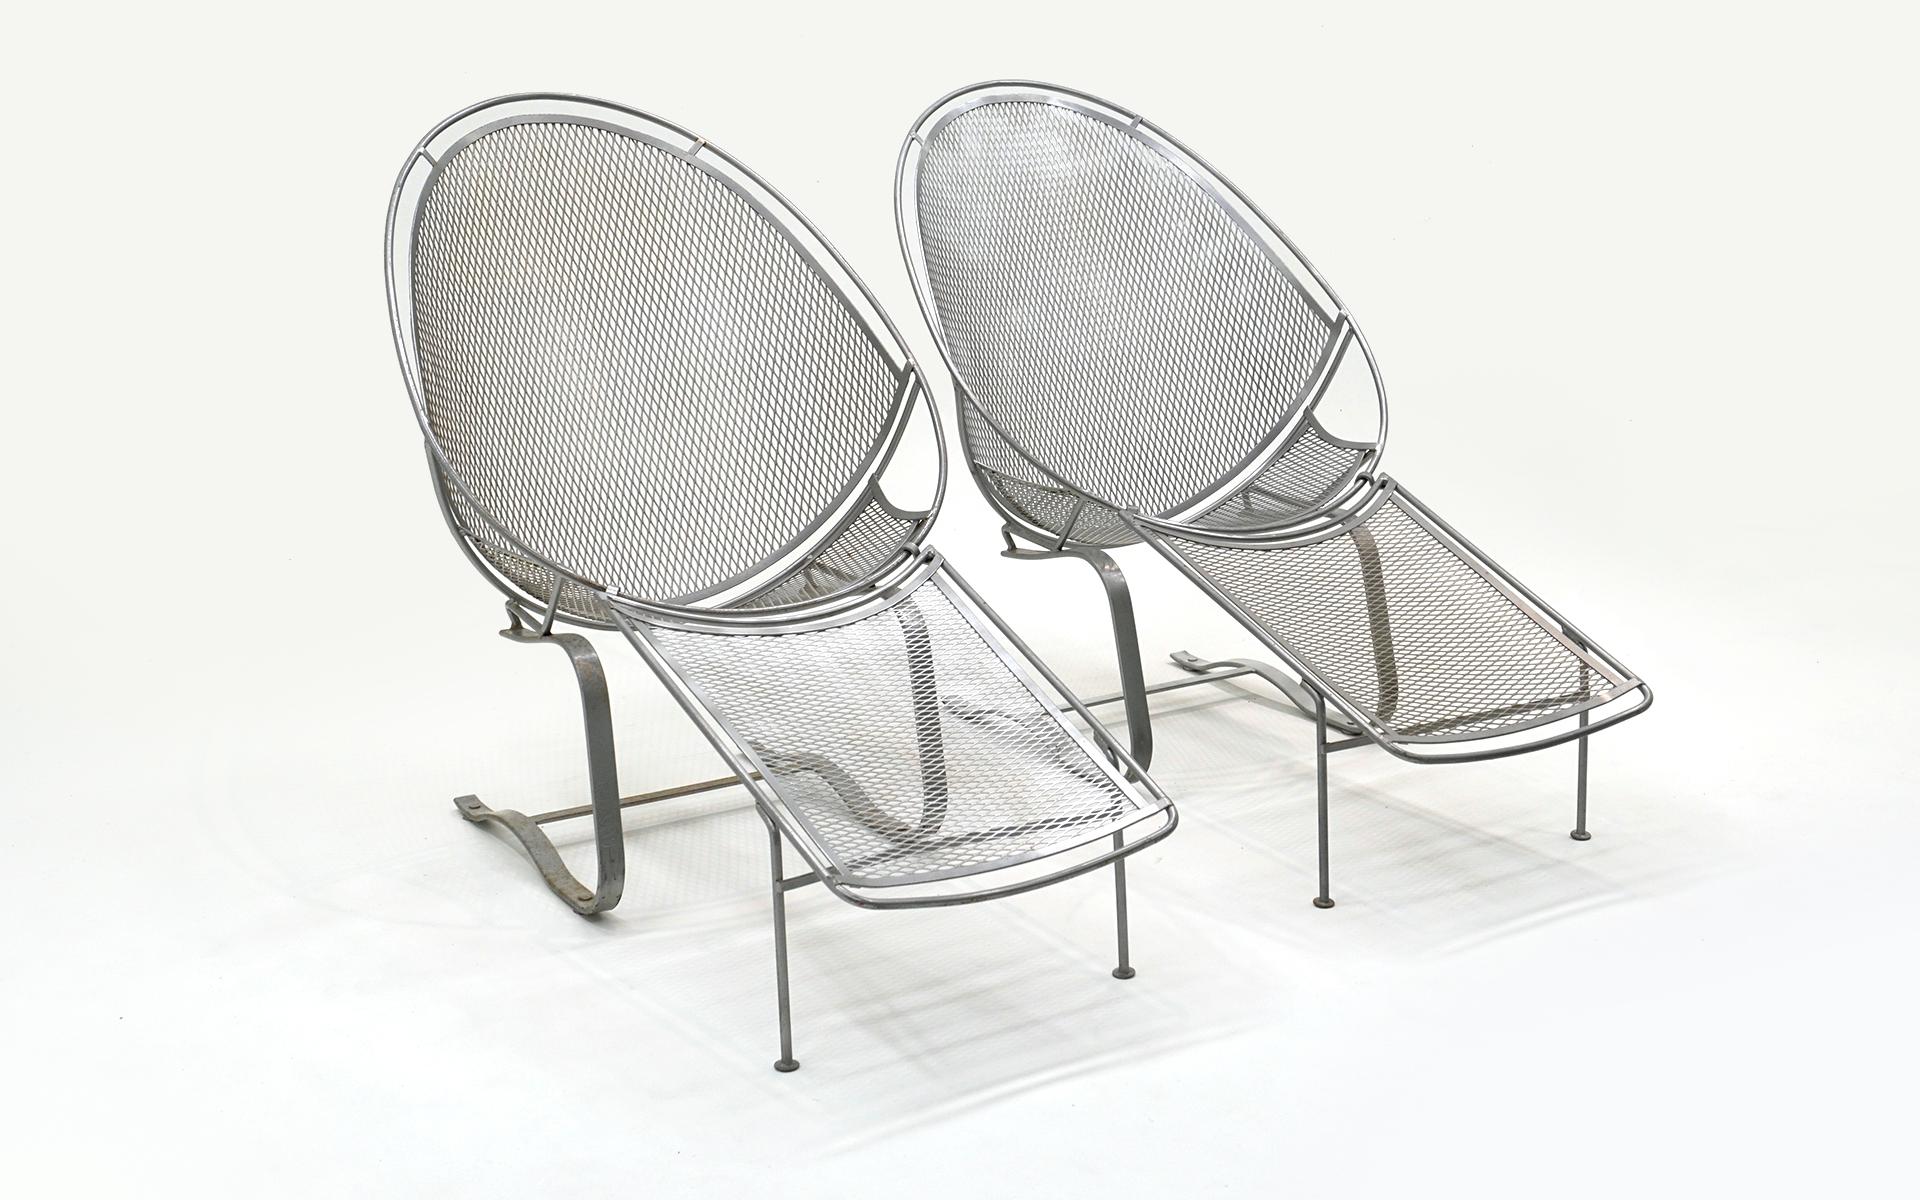 Pair of John Salterini patio, pool, oudoor lounge chairs on a springer base with footrests / ottomans that are removable.  These chairs are extremely comfortable.  They were powder coated in a silver finish and have spent three years outside so